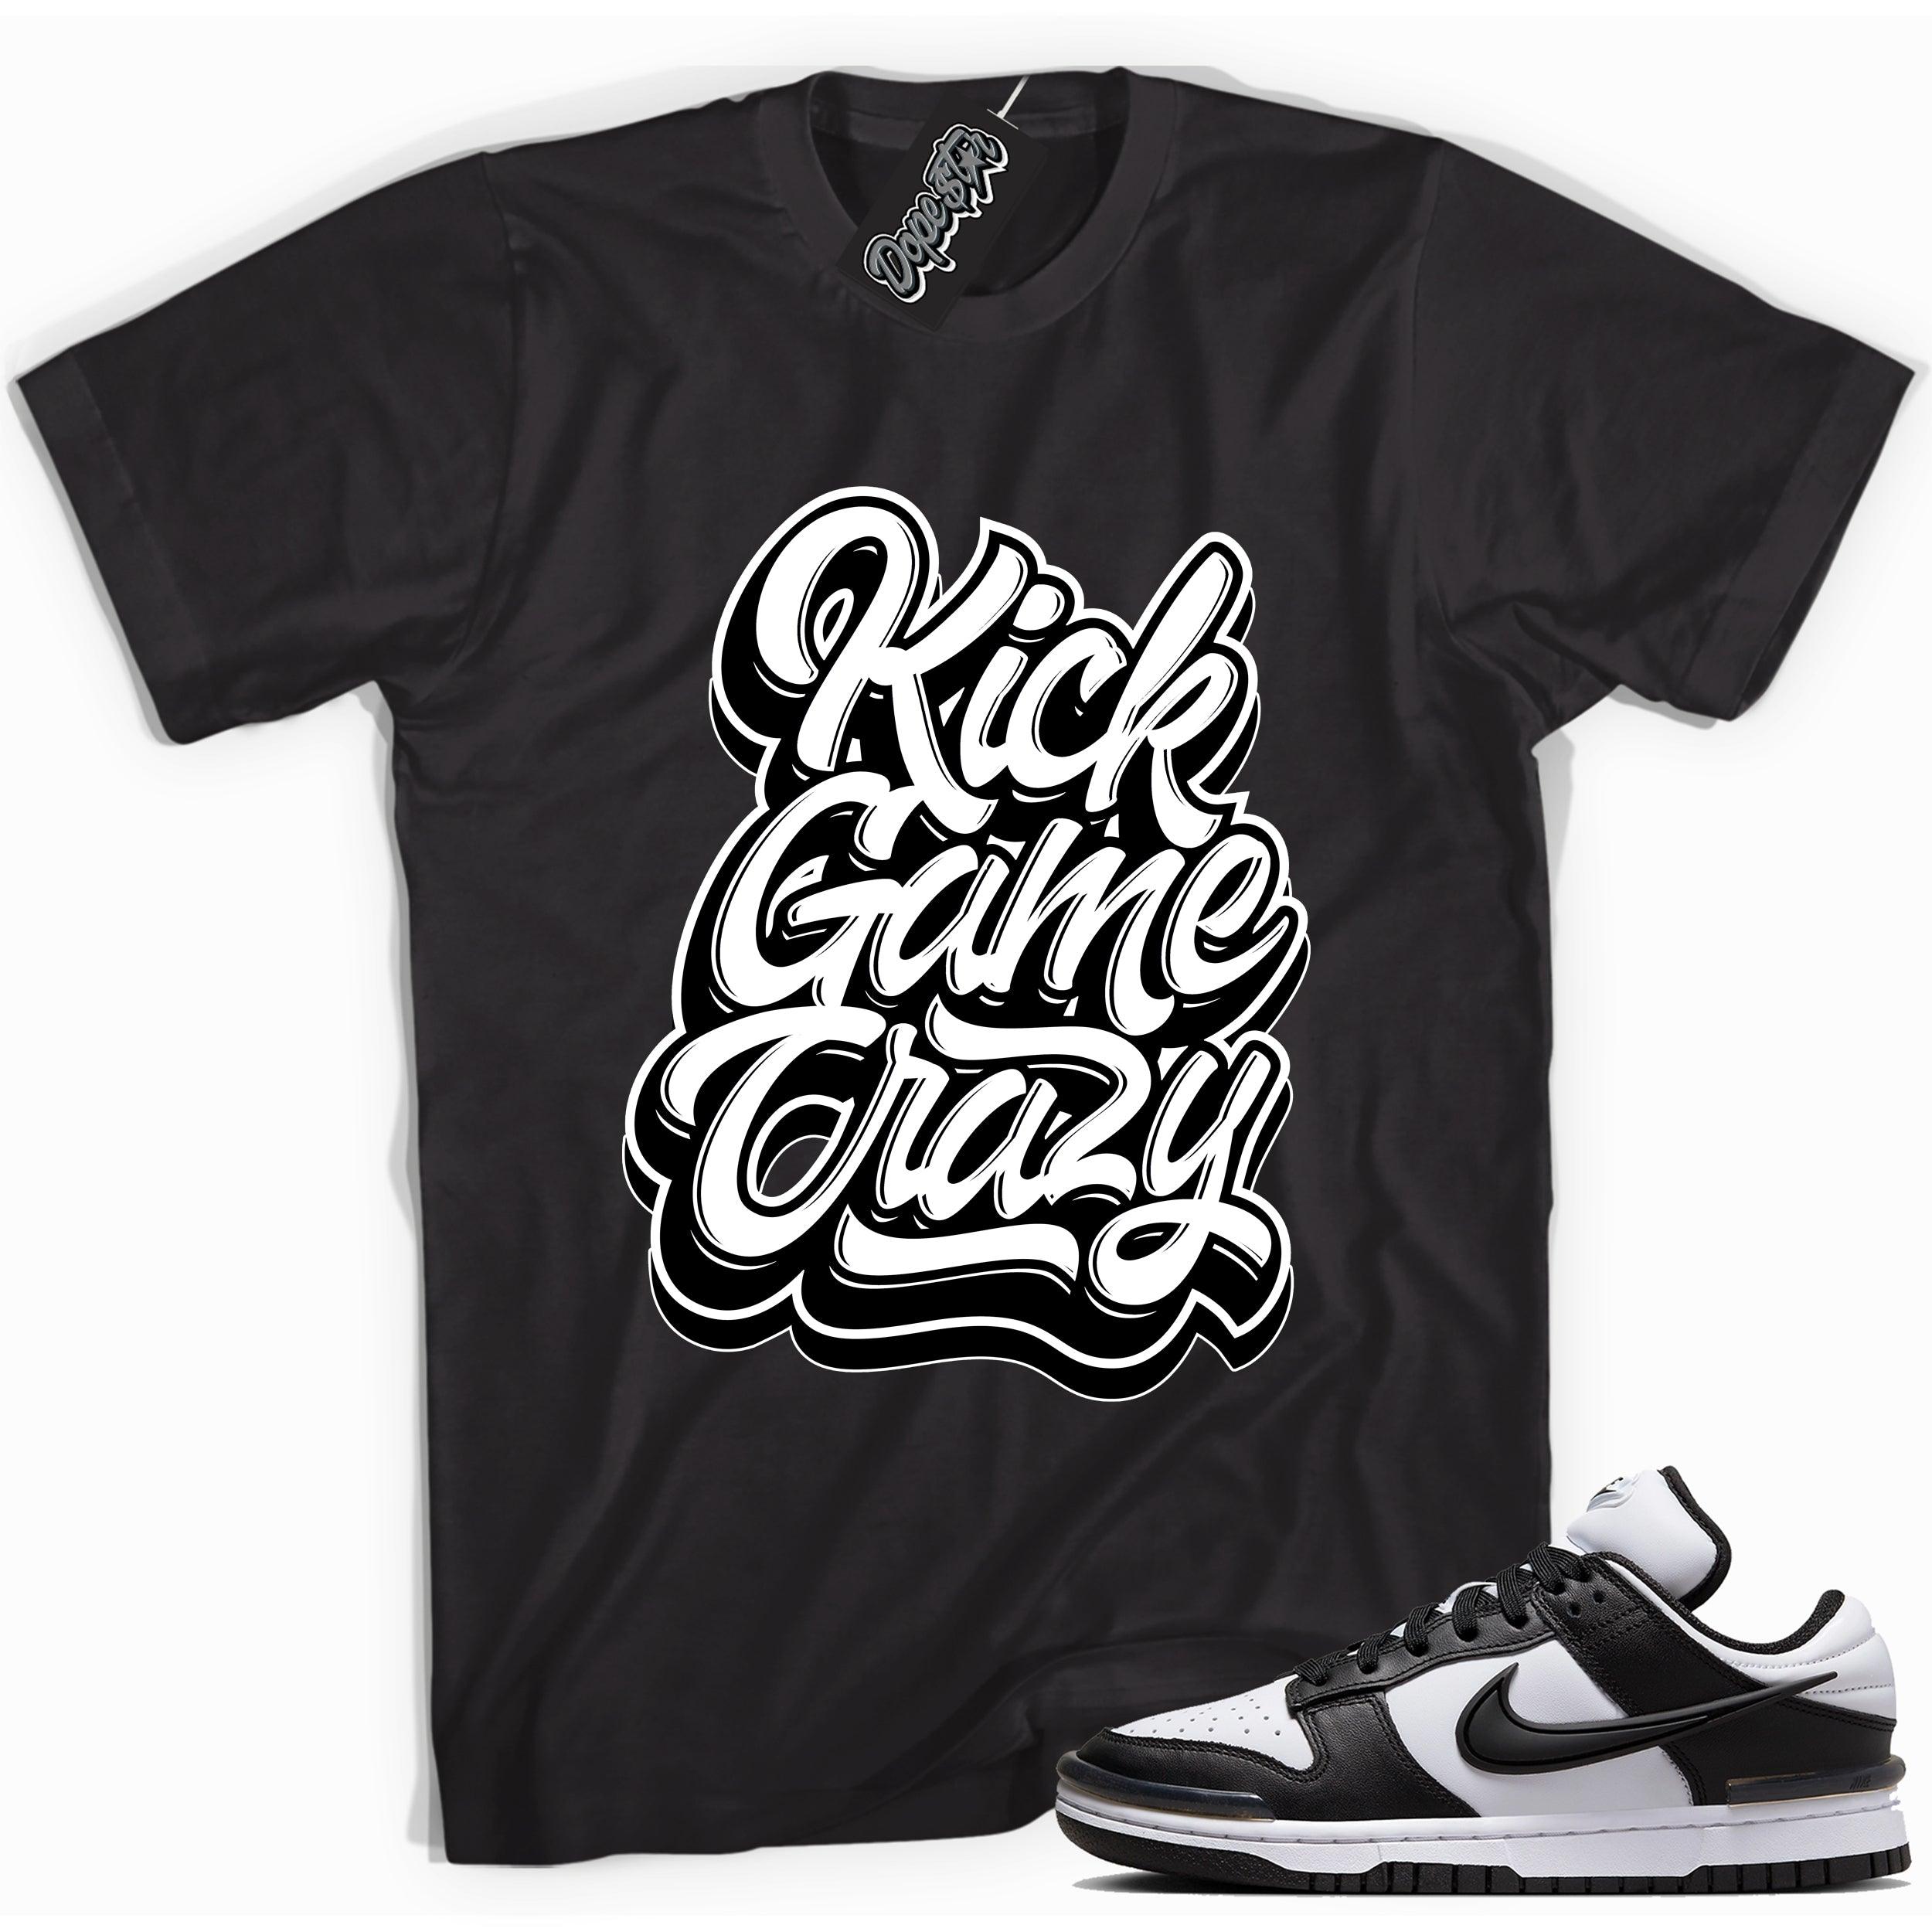 Cool black graphic tee with 'kick game crazy' print, that perfectly matches Nike Dunk Low Twist Panda sneakers.